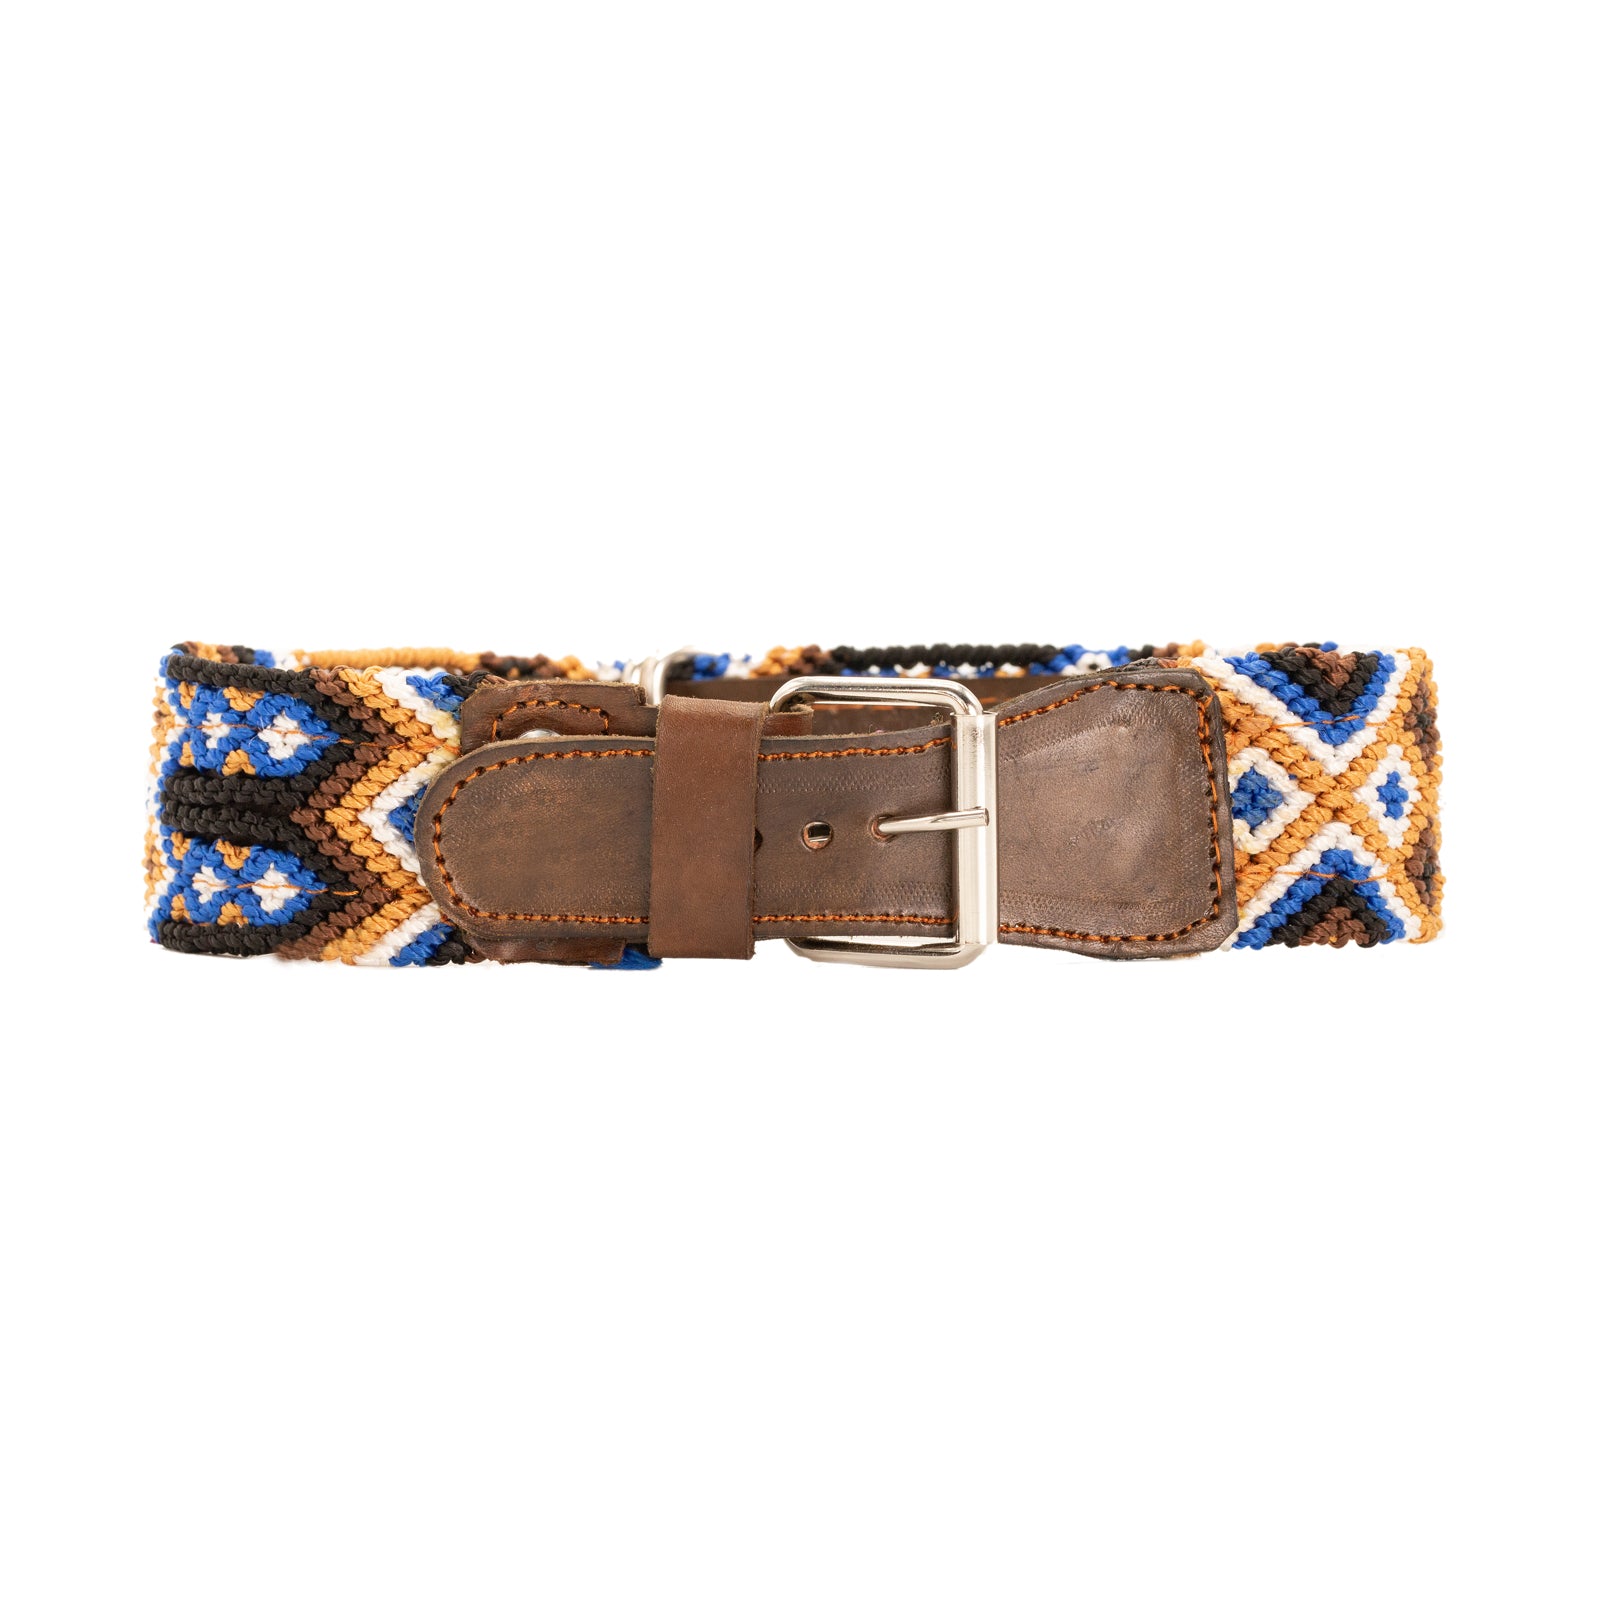 Handwoven dog collar designed for both comfort and style